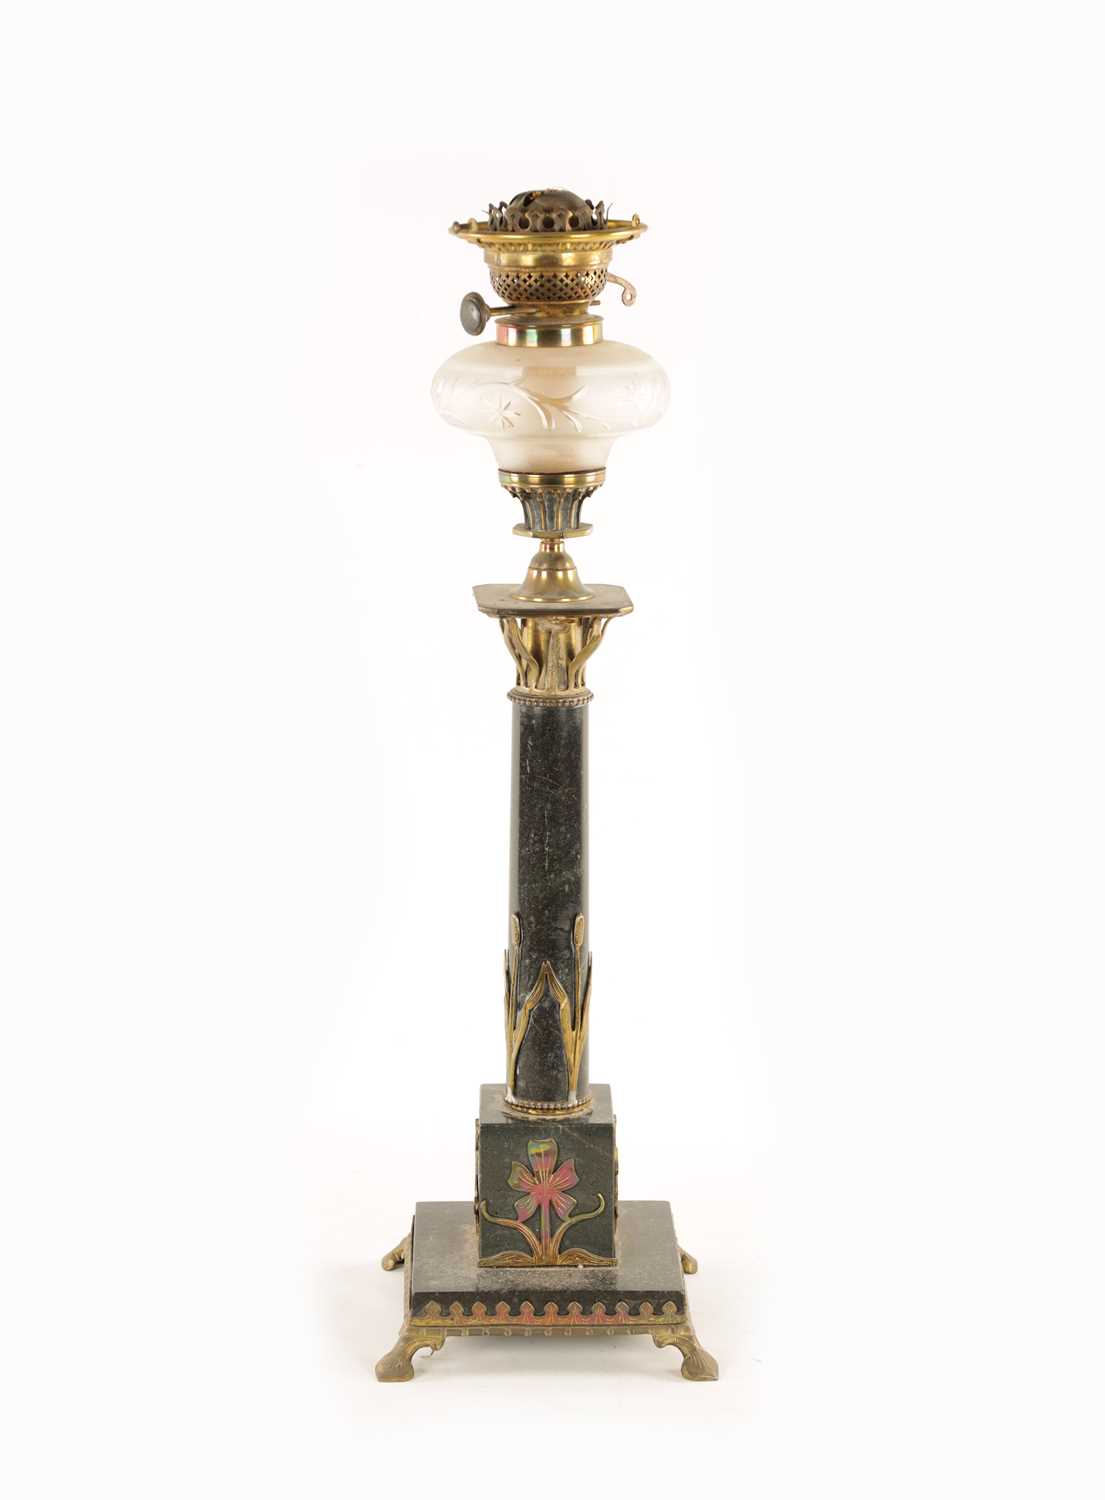 A LATE 19TH CENTURY FRENCH ORMOLU MOUNTED VERDE GREEN MARBLE OIL LAMP